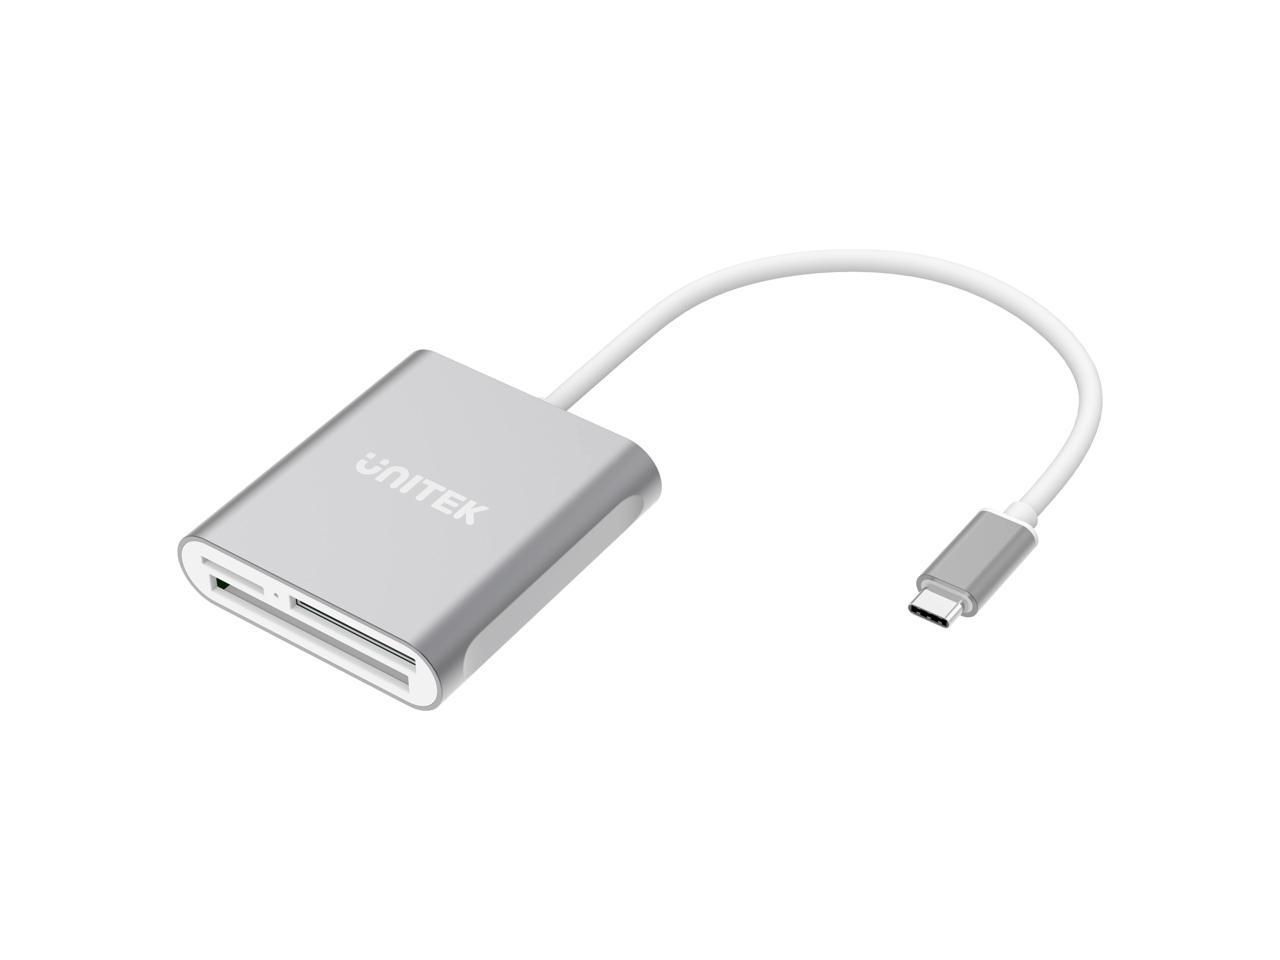 CAOMING USB-C/Type-C to SD Card Camera Reader Adapter